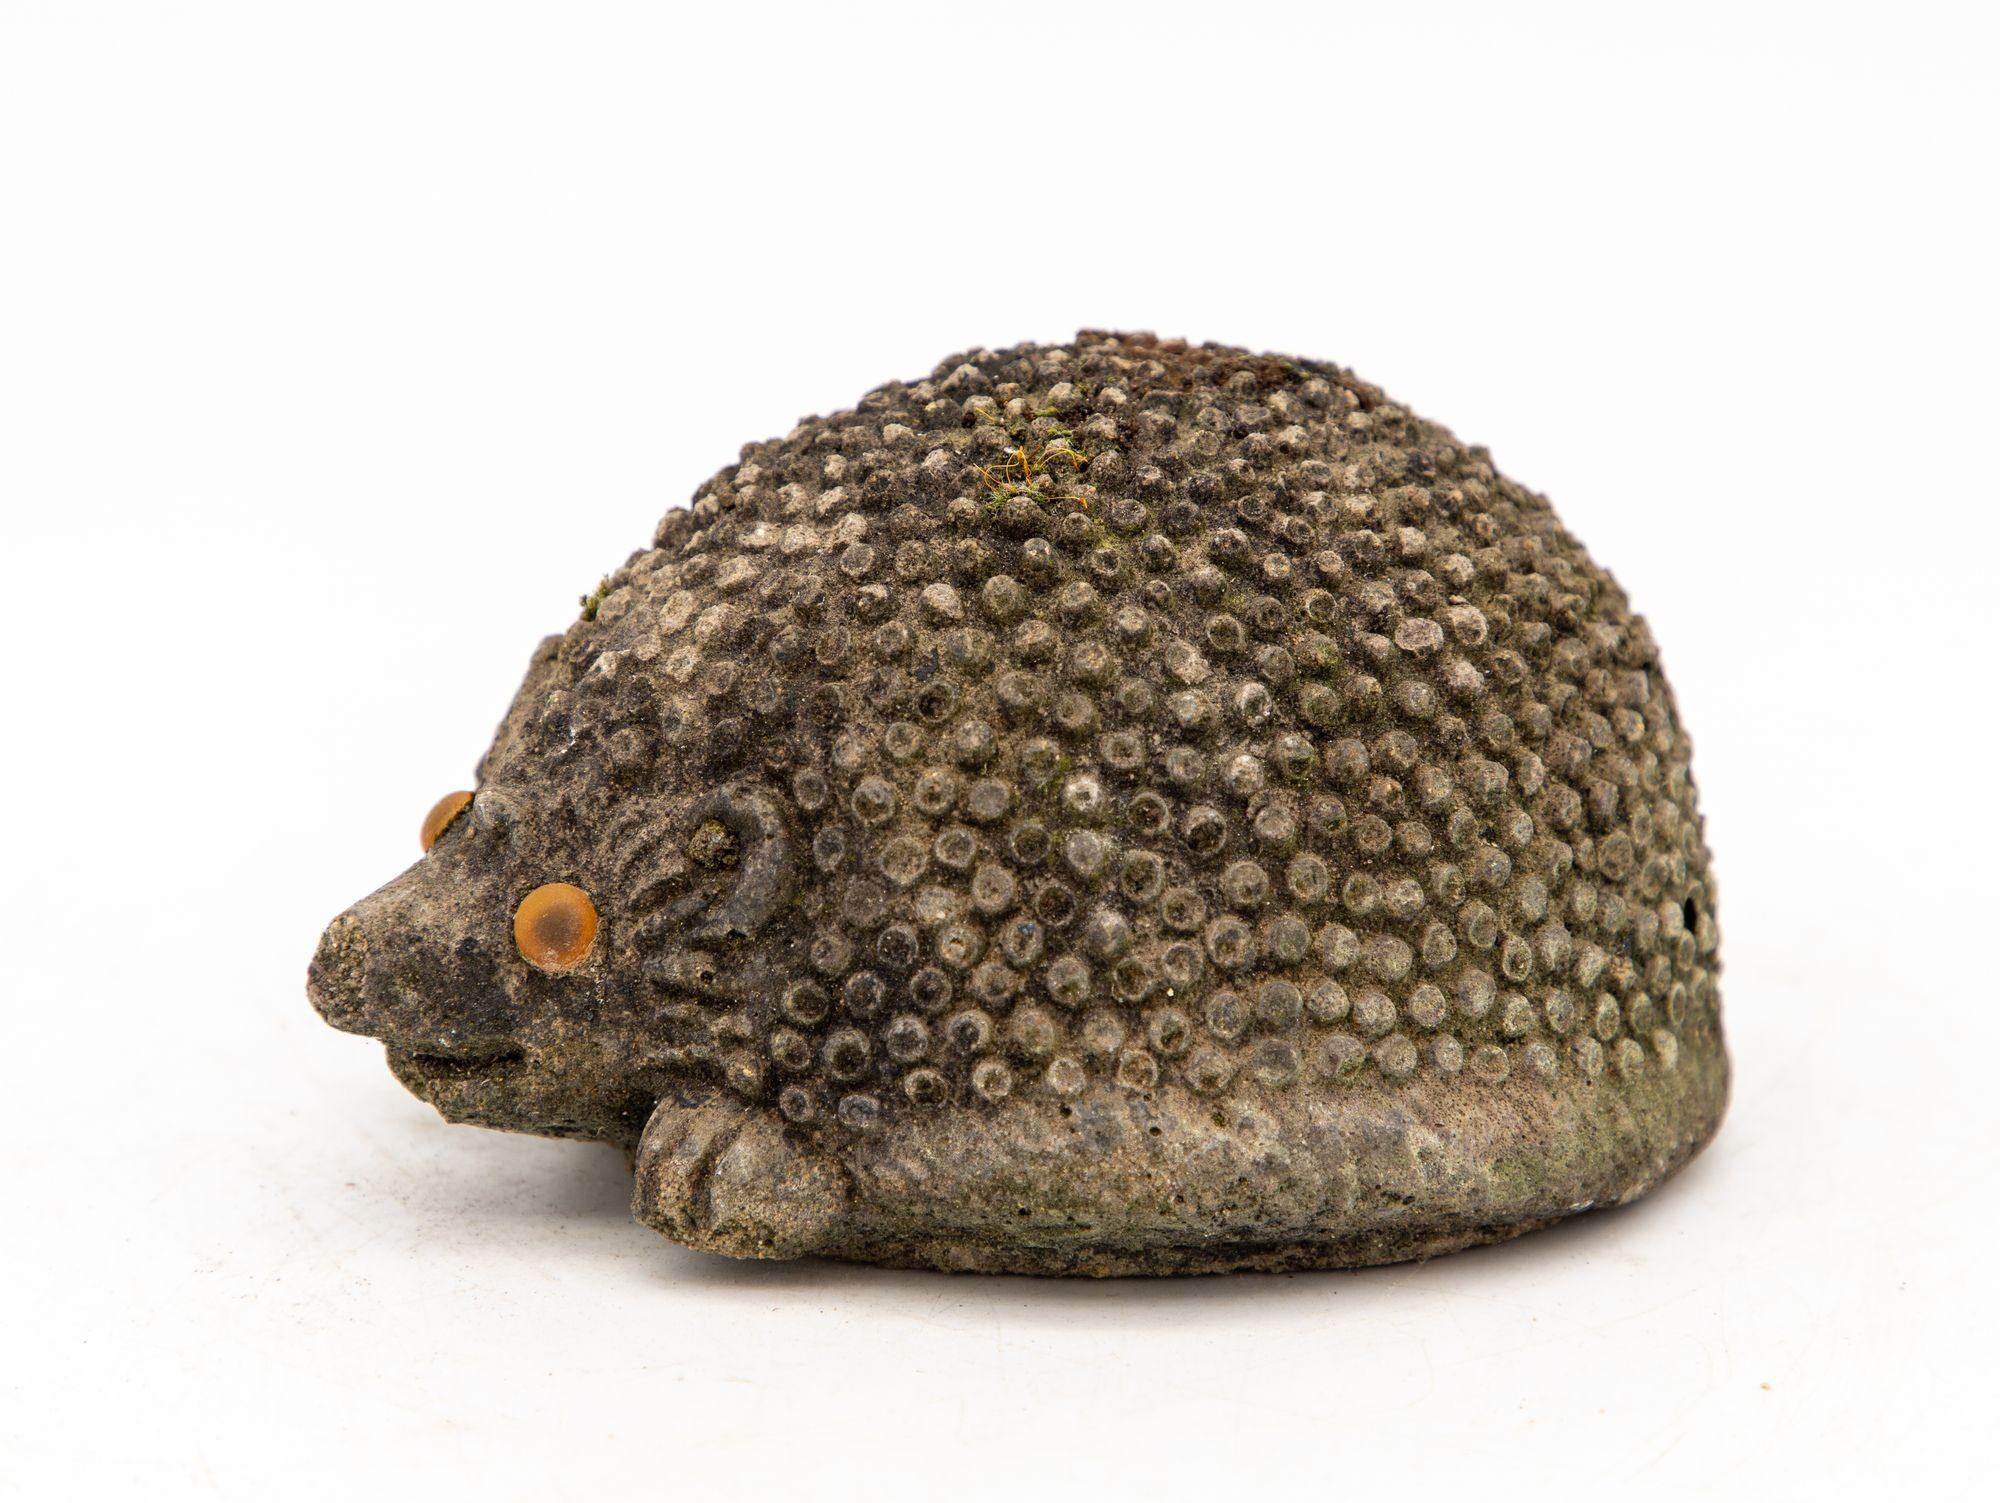 This delightful reconstituted stone hedgehog garden ornament adds a touch of whimsy and charm to your outdoor decor. This ornament is crafted with intricate details and lifelike expressions, making it a unique and eye-catching addition to any